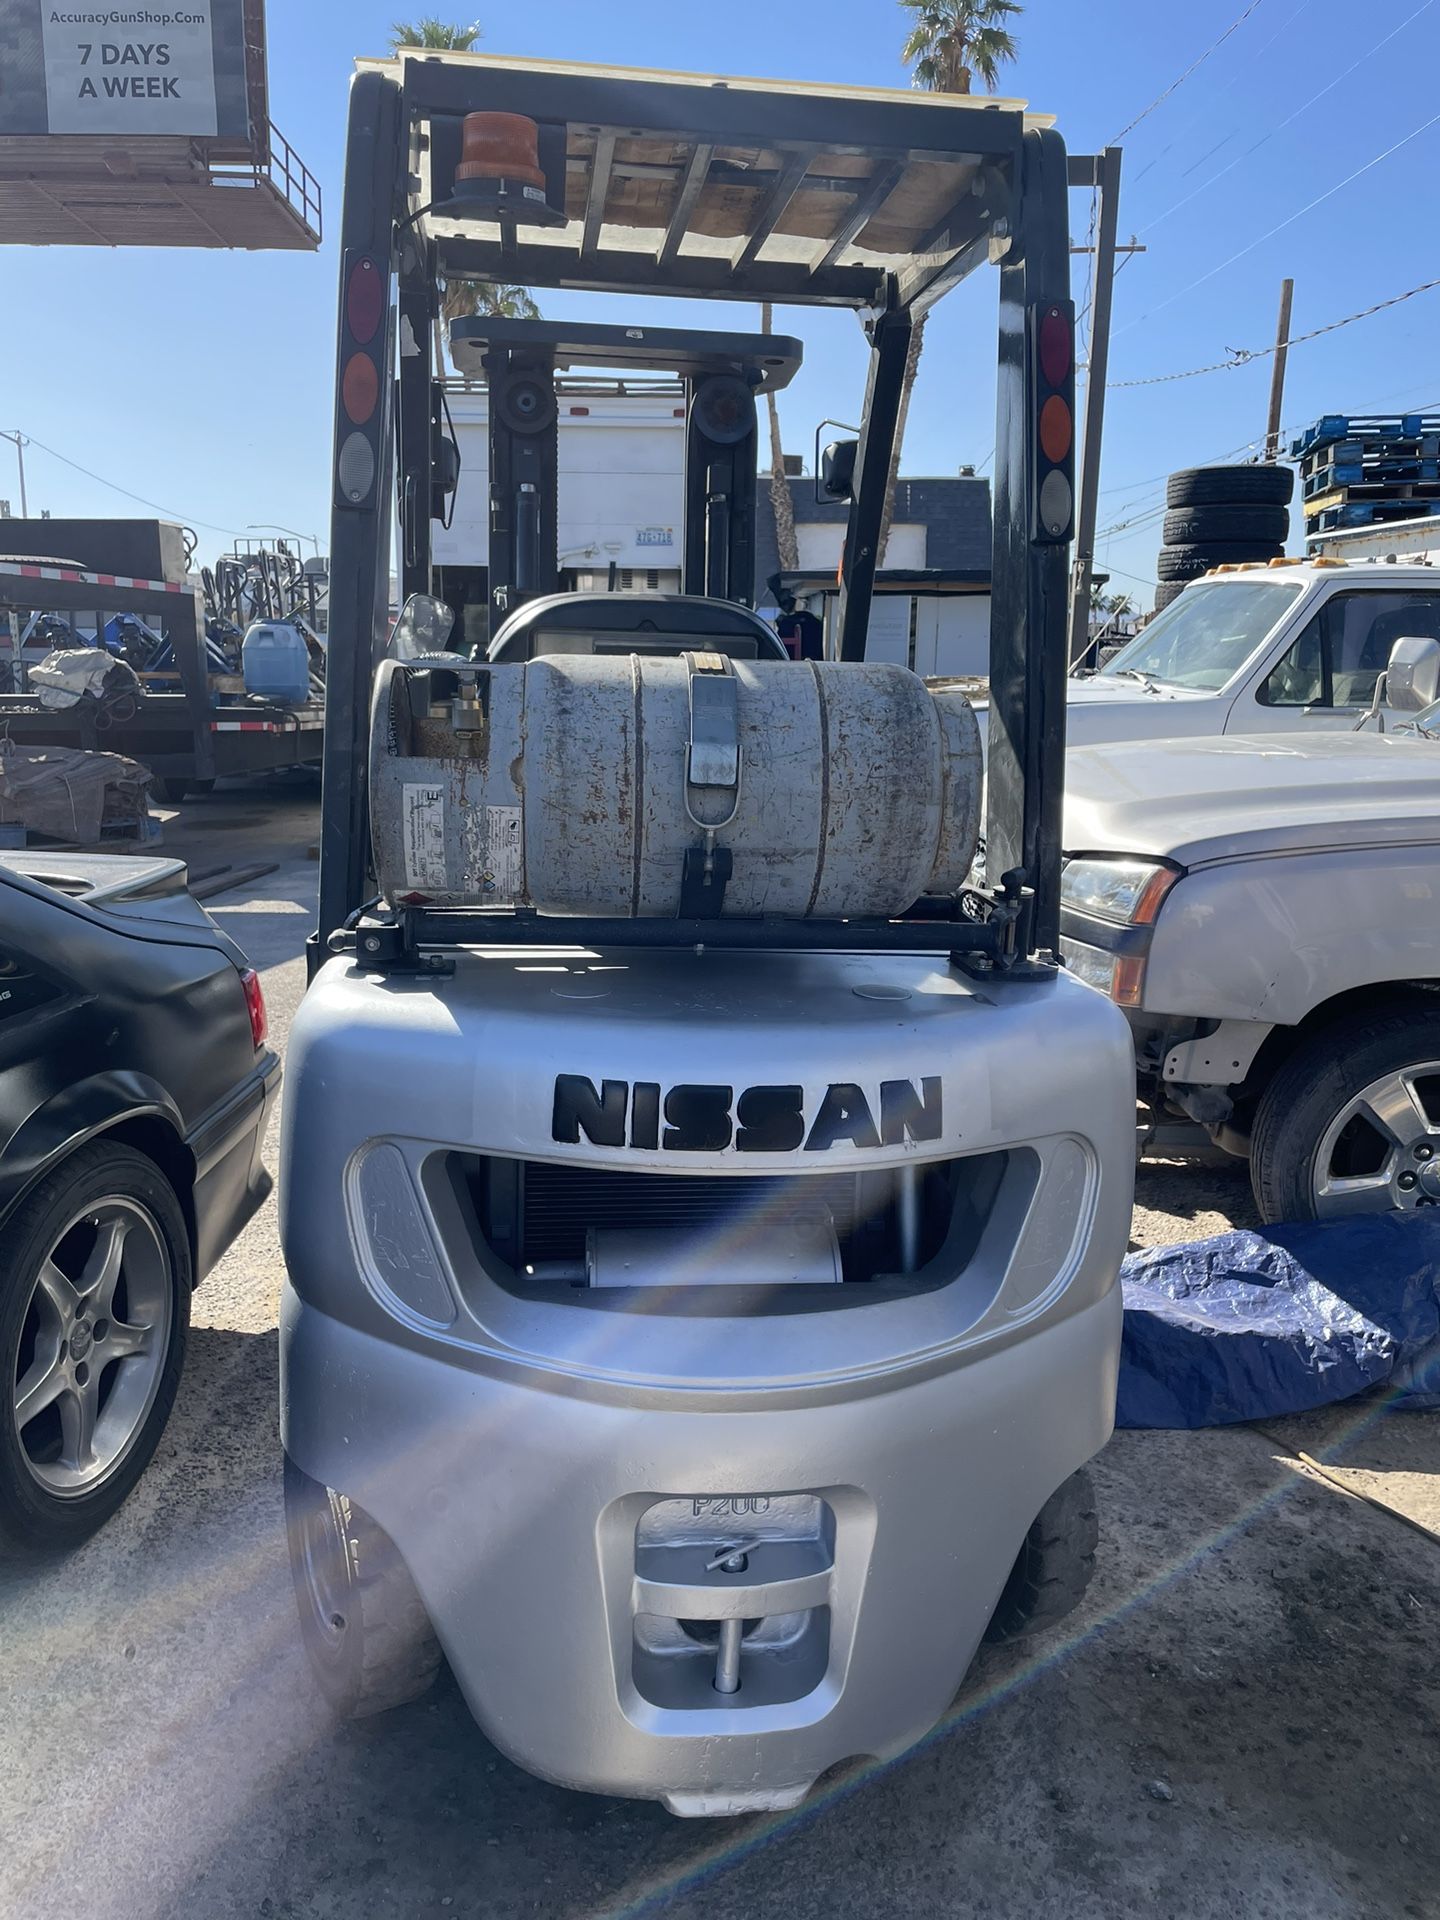 nissan fortlift 3400 lift capacity